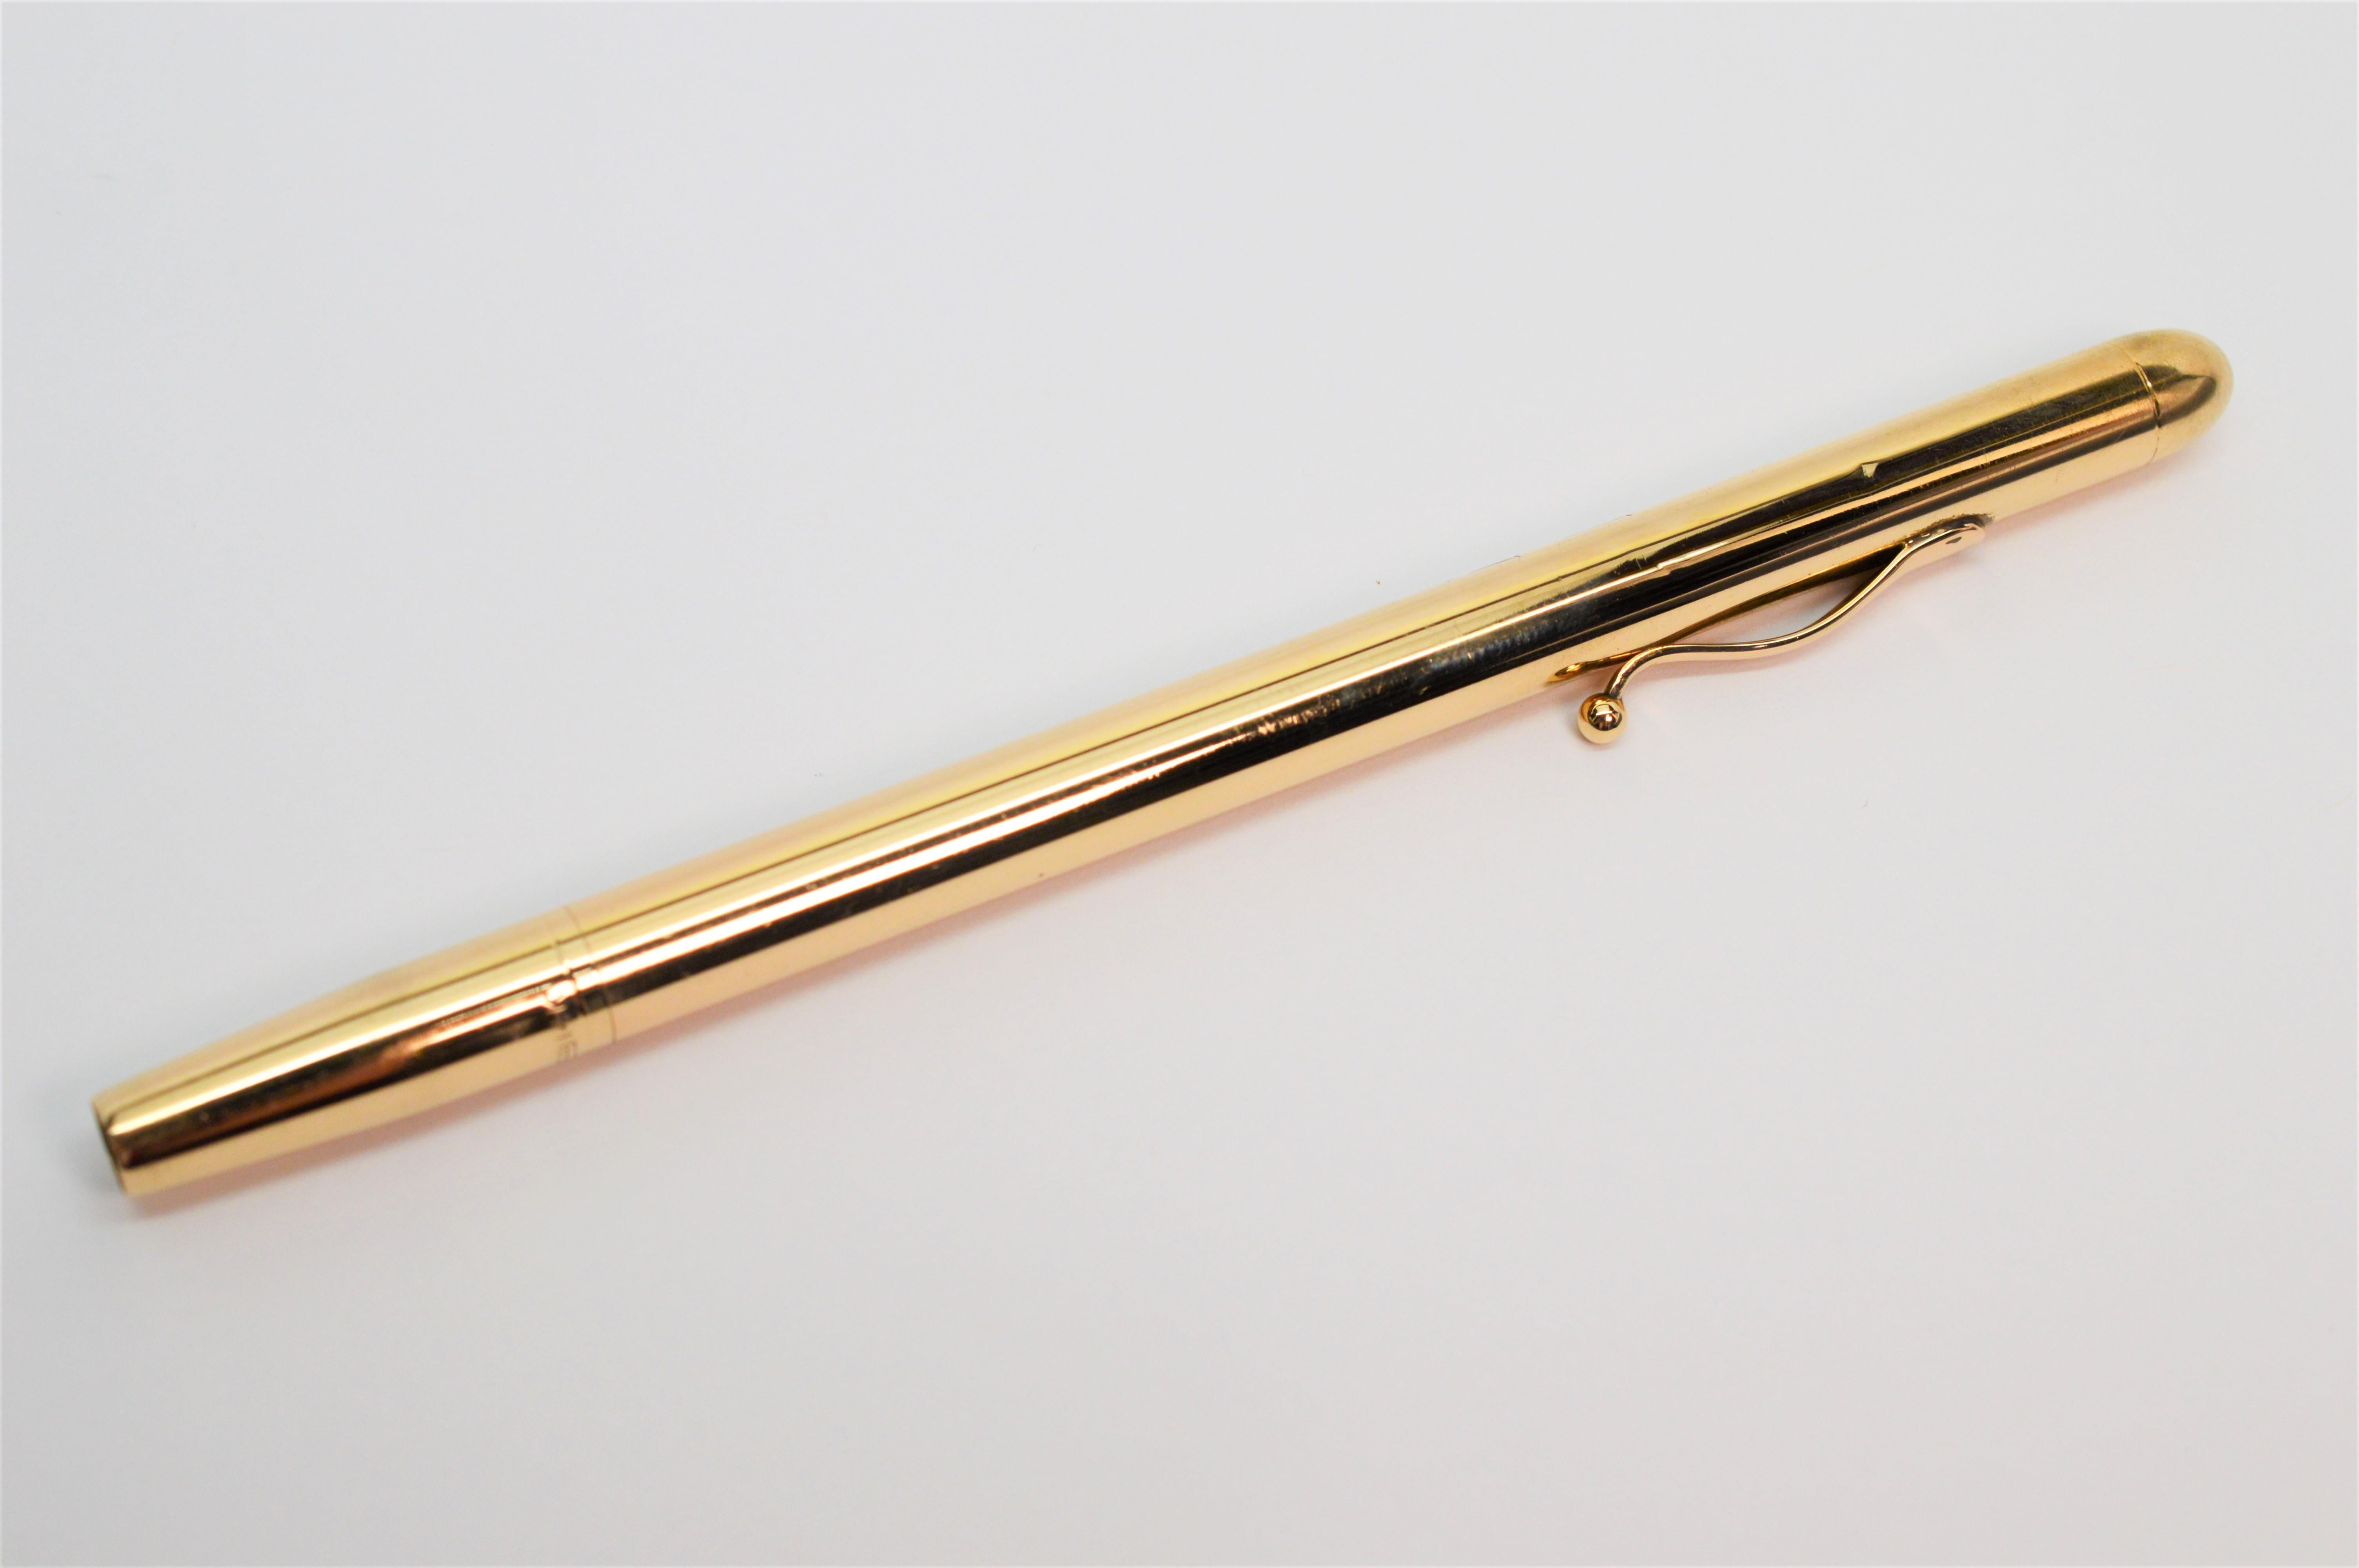 Louis Tamis & Sons fourteen karat 14k yellow gold mechanical stockbroker's pencil, circa 1955-1960. New York Maker, L T & Sons founded in 1909 became known as one of the top high-end jewelry manufacturers in America during the period. A rare find,